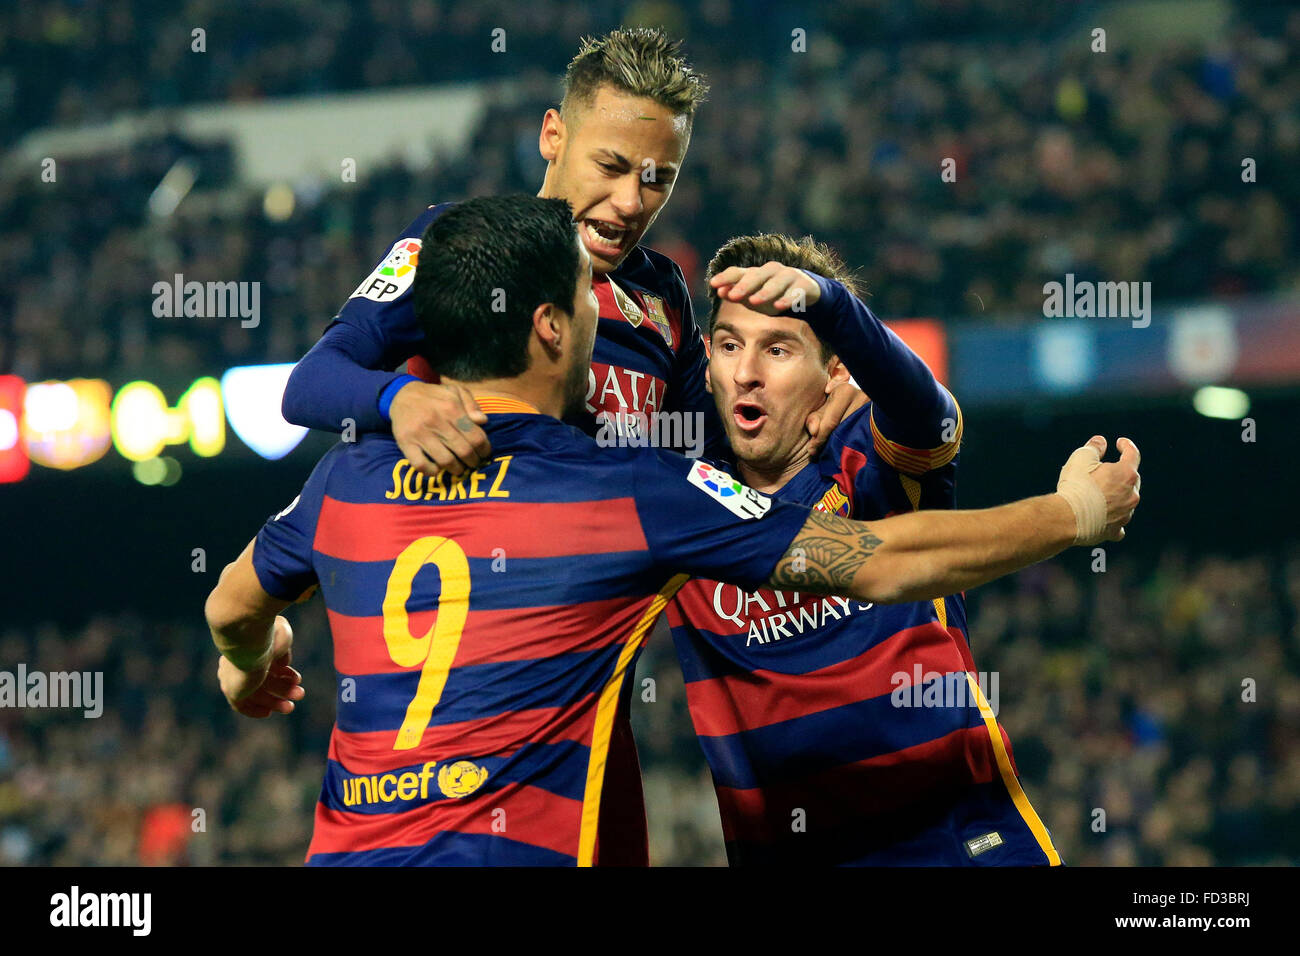 Barcelona, Spain. 27th Jan, 2016. Barcelona's Luis Suarez (L) celebrates for scoring with Neymar (Top) and Lionel Messi during the second round of the Spanish King's Cup quarter-finals against Athletic Bilbao at the Camp Nou stadium in Barcelona, Spain, on Jan. 27, 2016. Barcelona advanced to the semi-final with a total score 5-2. © Pau Barrena/Xinhua/Alamy Live News Stock Photo